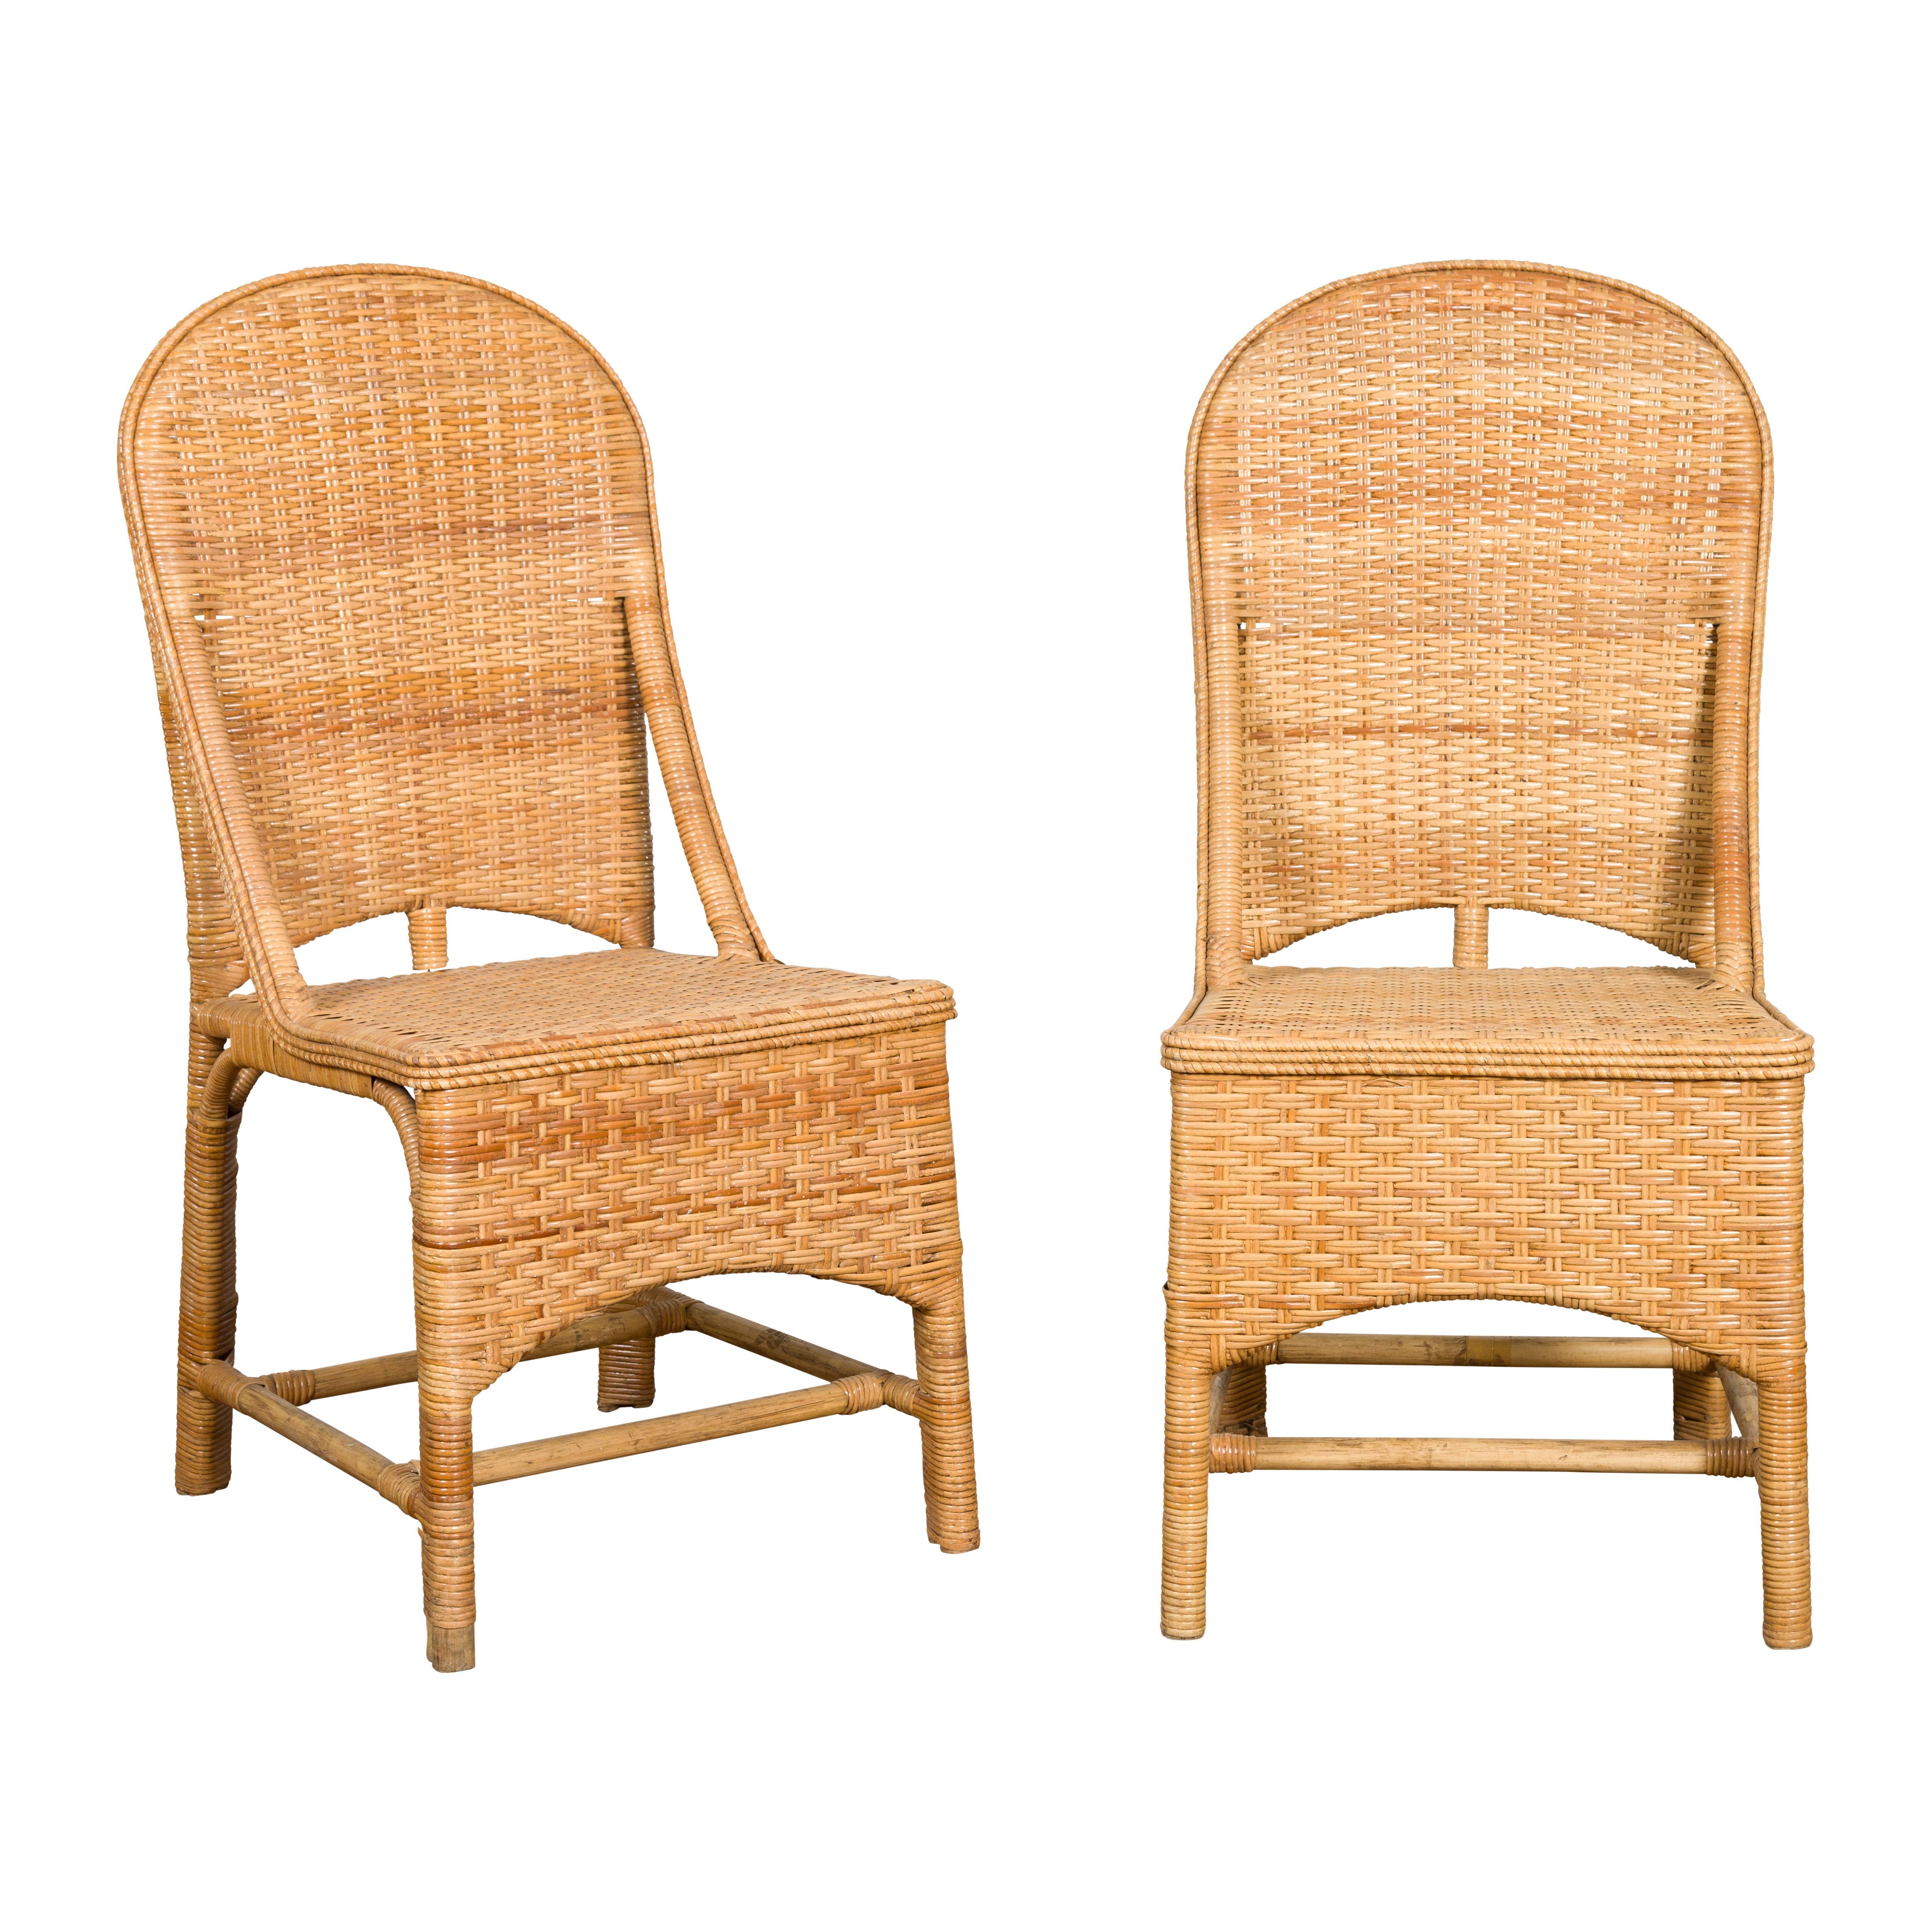 1950s Midcentury Country Style Woven Rattan Rustic Chairs, Pair For Sale 10